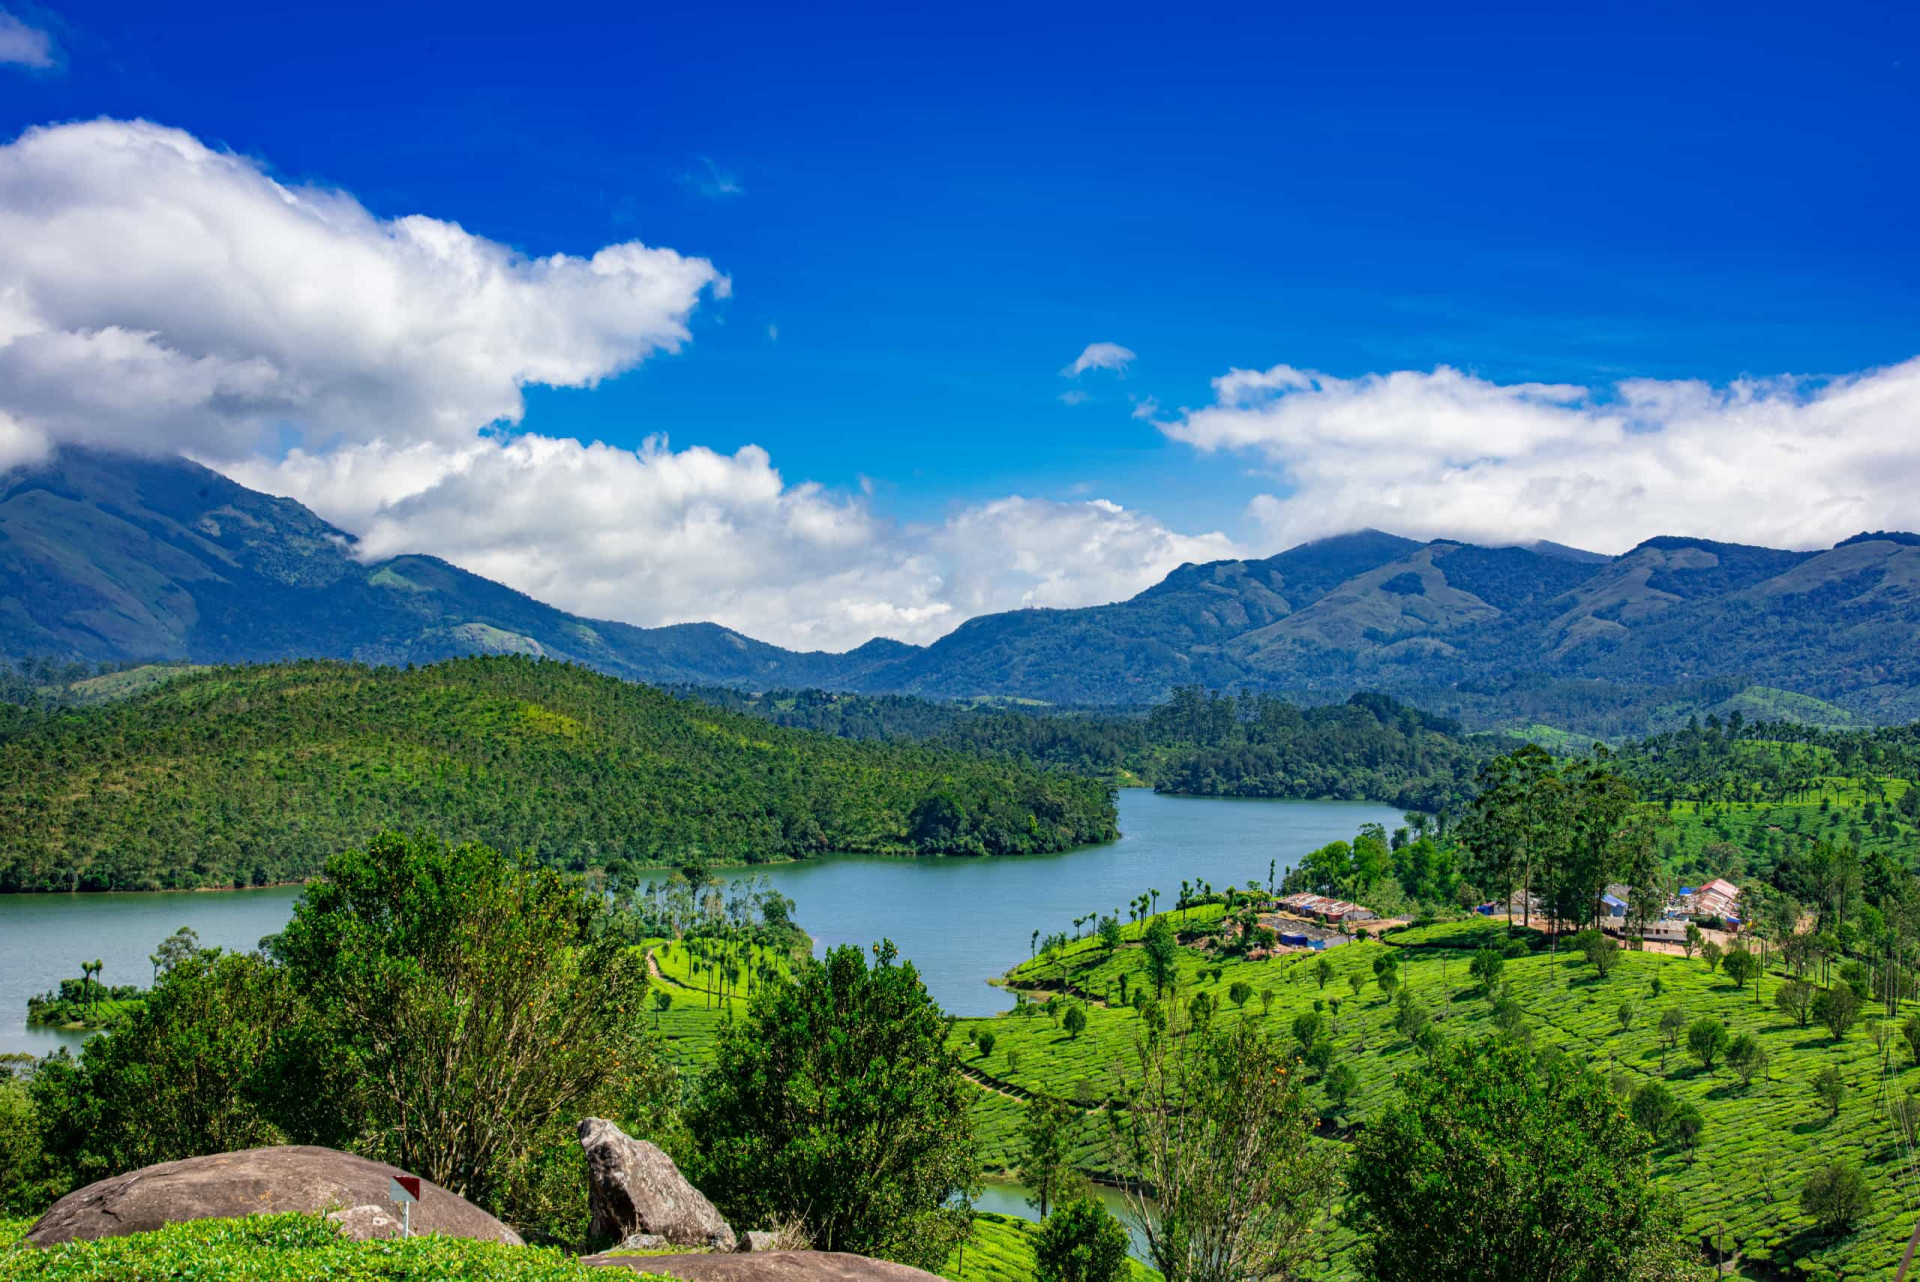 <p>Kerala's Munnar hill station squats on the Western Ghats mountain ranges in Idukki district 1,600 m (5,249 ft) above sea level, overlooking vast swathes of tea plantations. The vibrant greenery is simply overwhelming!</p><p>You may also like:<a href="https://www.starsinsider.com/n/246320?utm_source=msn.com&utm_medium=display&utm_campaign=referral_description&utm_content=470081v2en-en"> Actors who were way too young or too old for their roles</a></p>